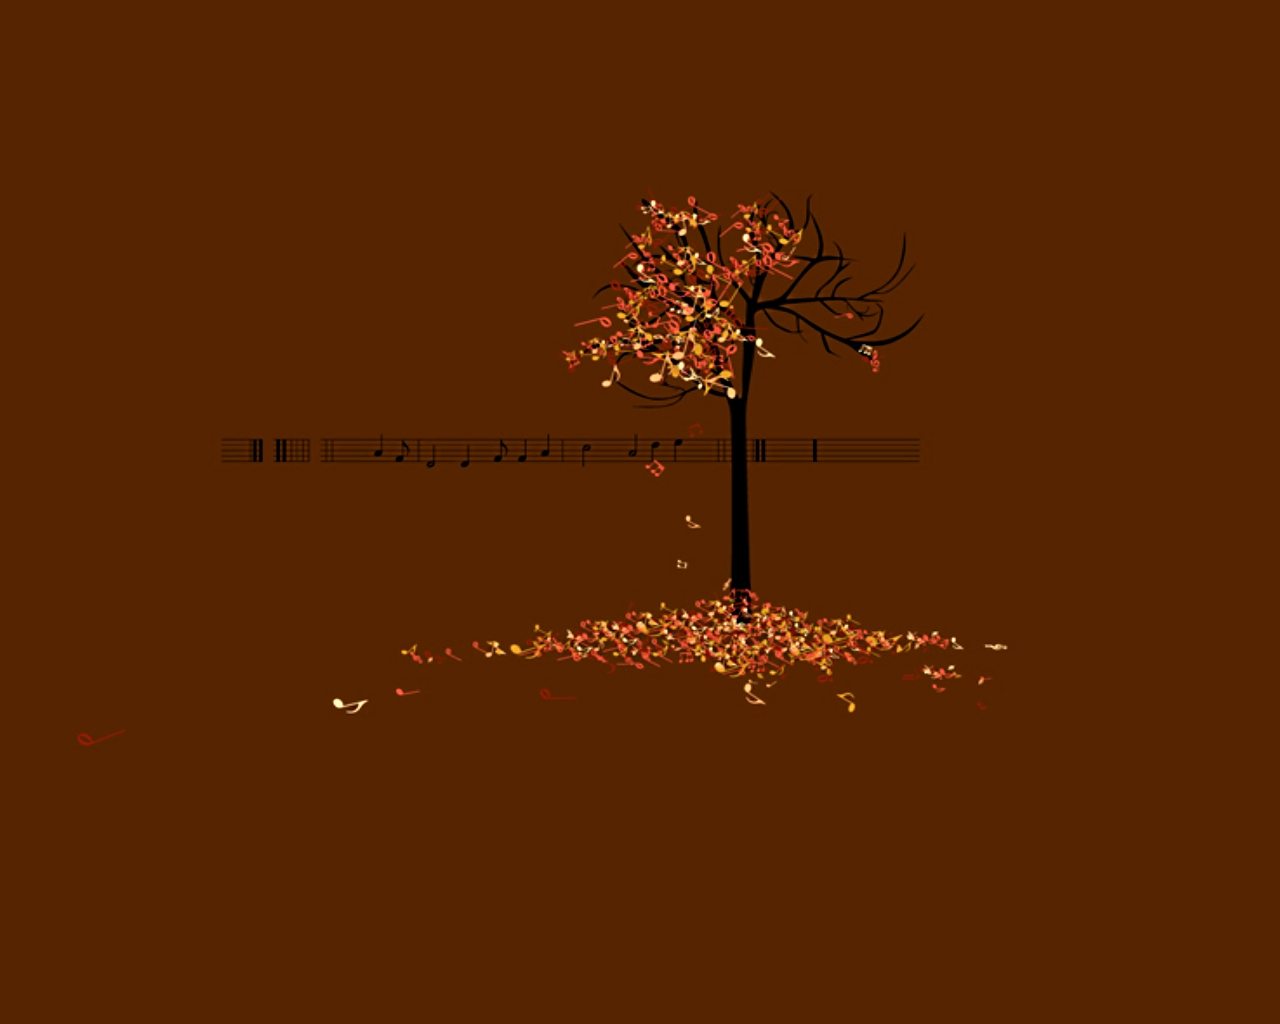 Musical Note Tree Artistic 1280x1024